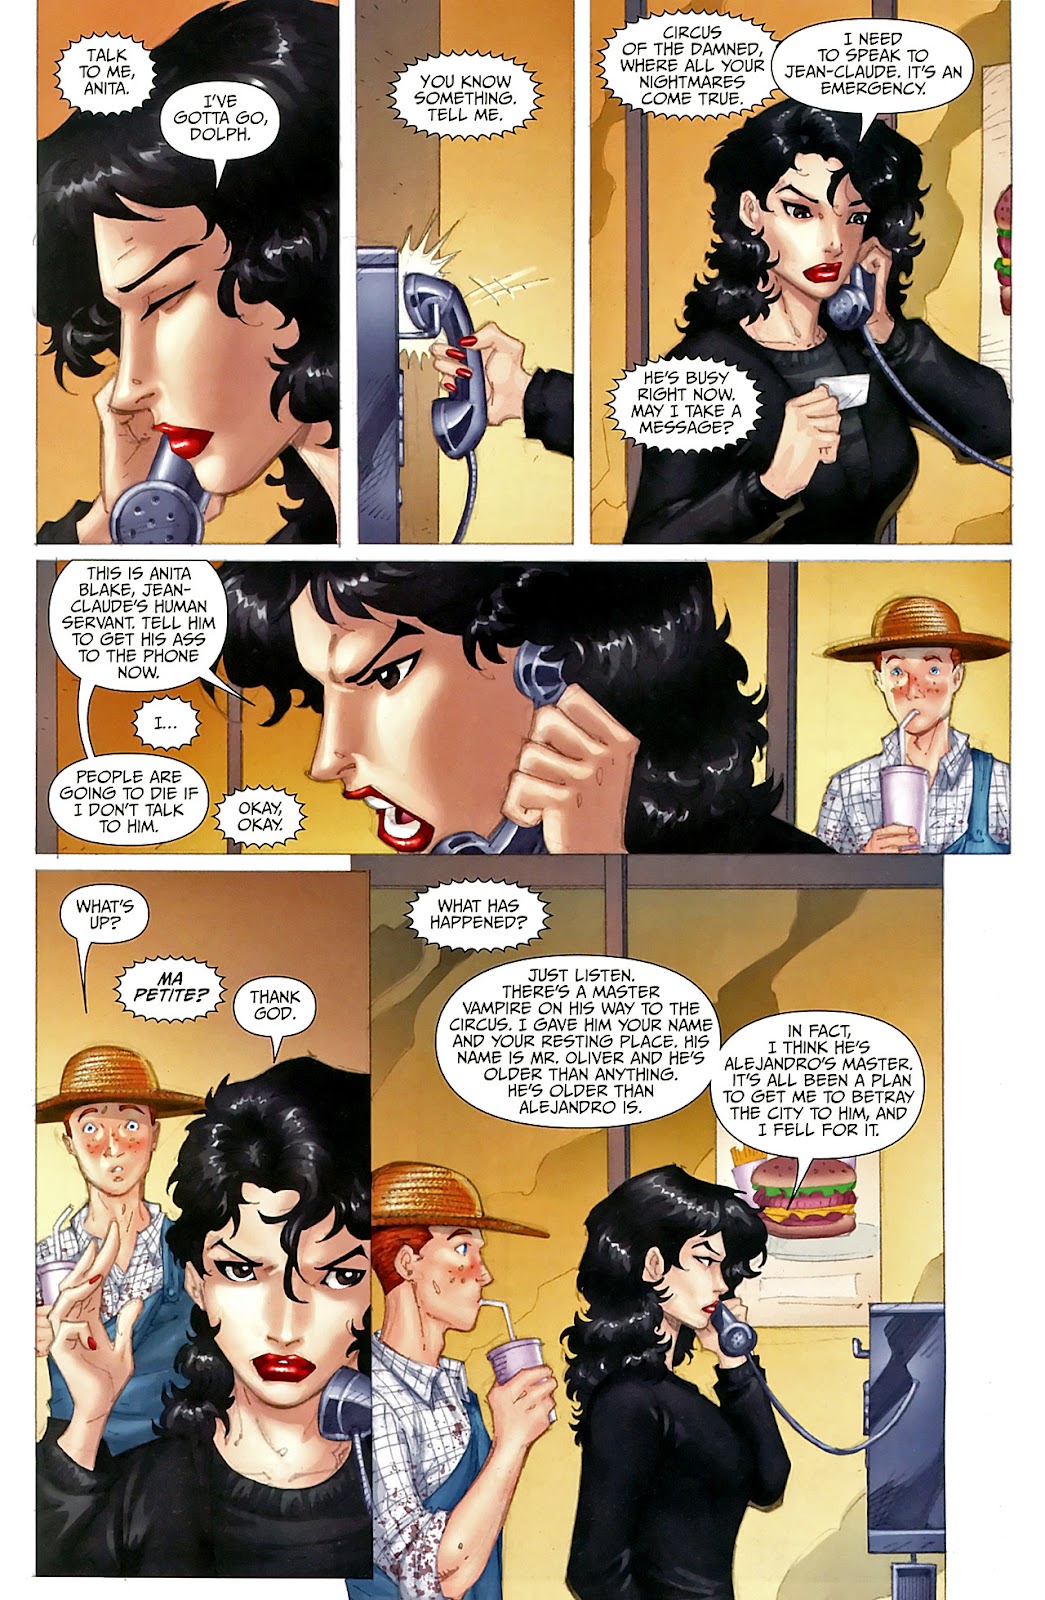 Anita Blake, Vampire Hunter: Circus of the Damned - The Scoundrel issue 4 - Page 5